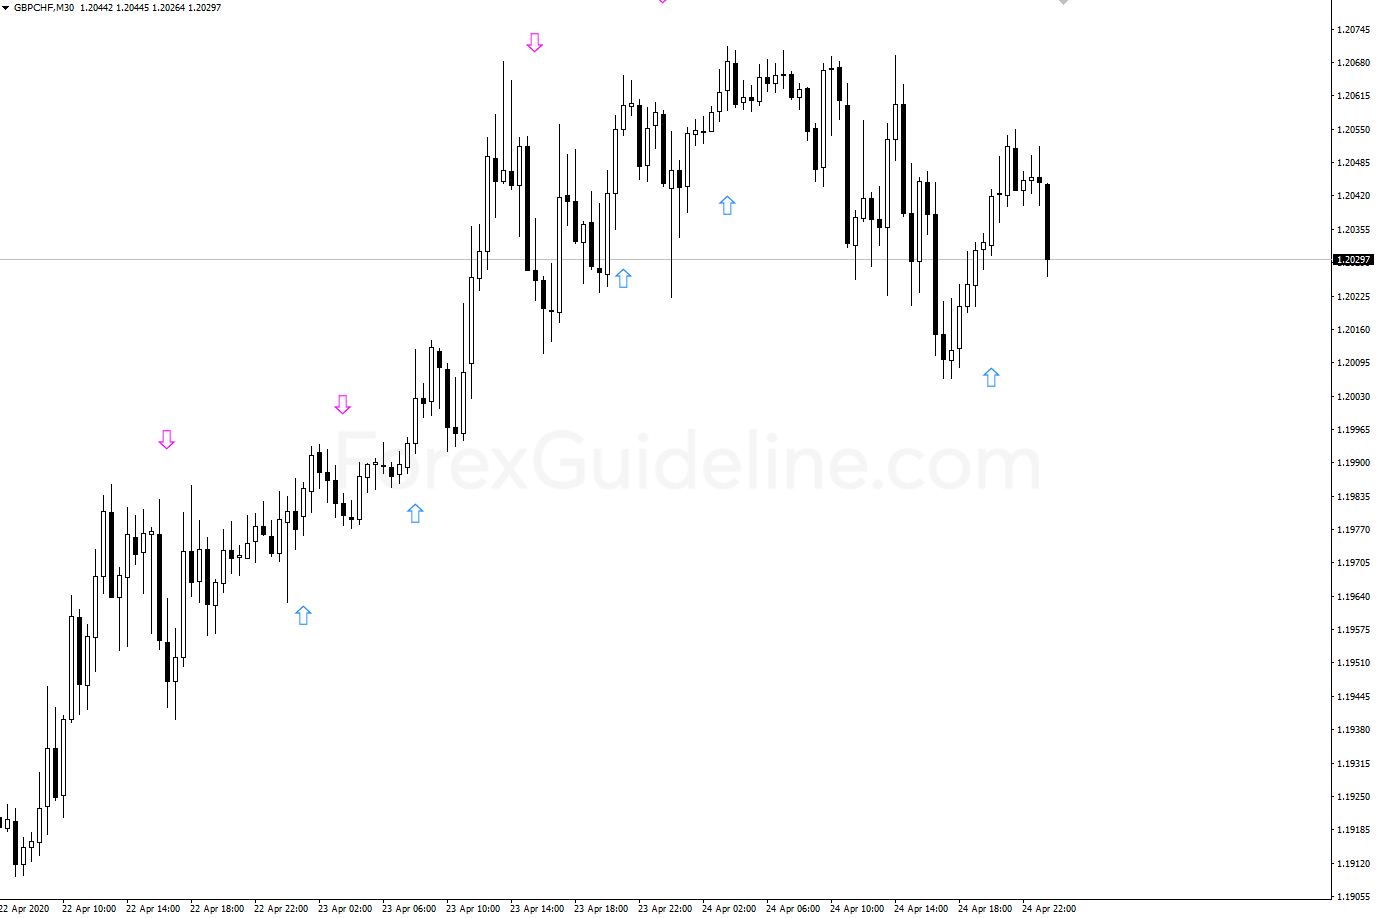 MACD Crossover Arrows and Alert